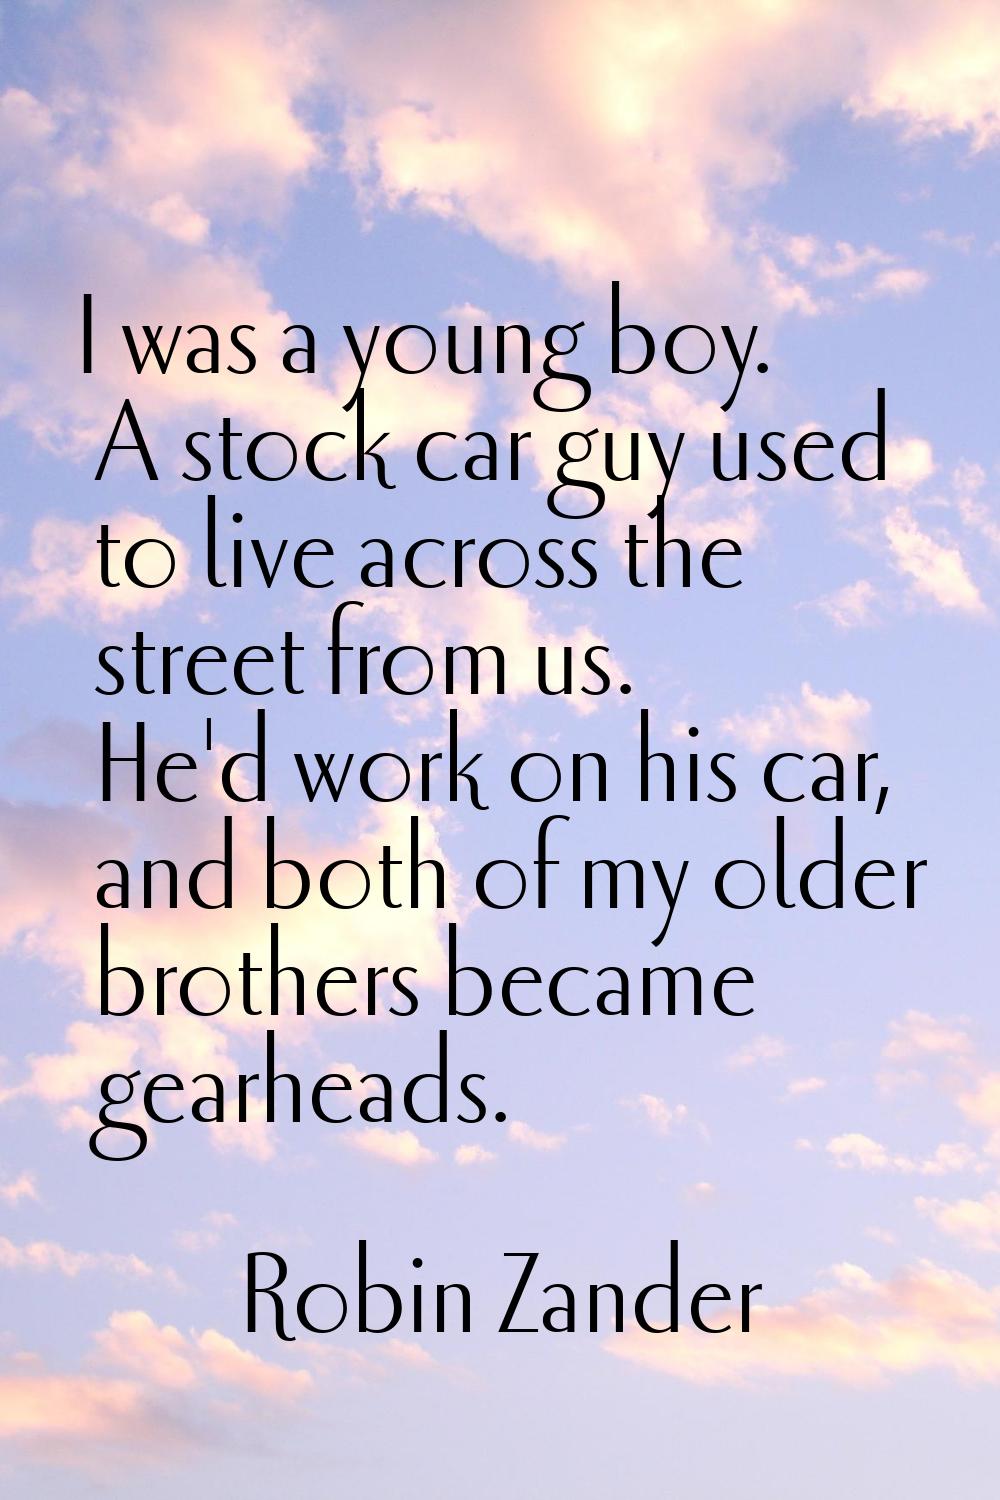 I was a young boy. A stock car guy used to live across the street from us. He'd work on his car, an